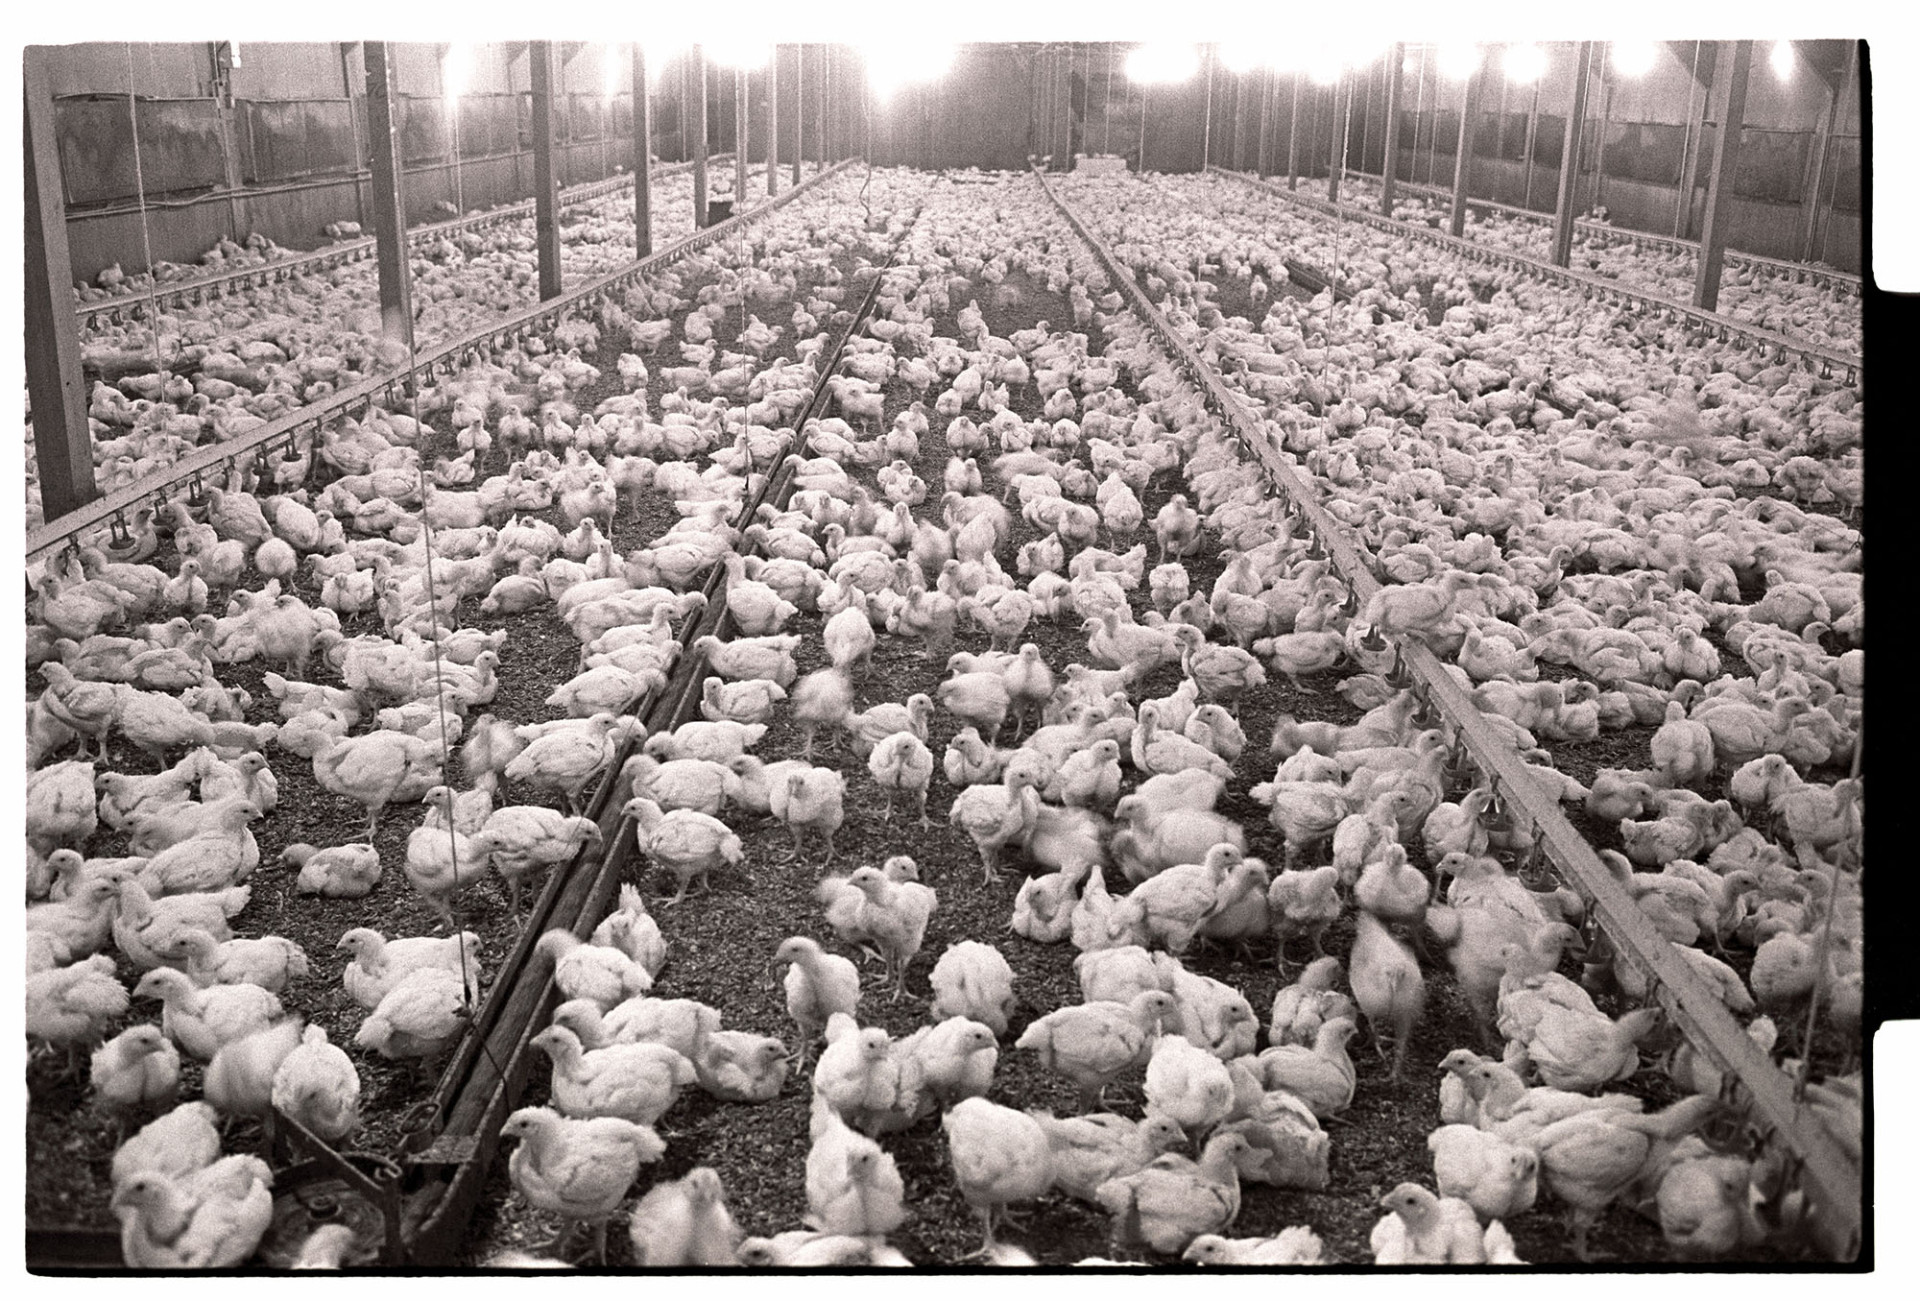 Interior of poultry breeding shed, hundreds of pullets! 
[The interior of a deep litter chicken rearing shed at Middlemore, North Tawton.]